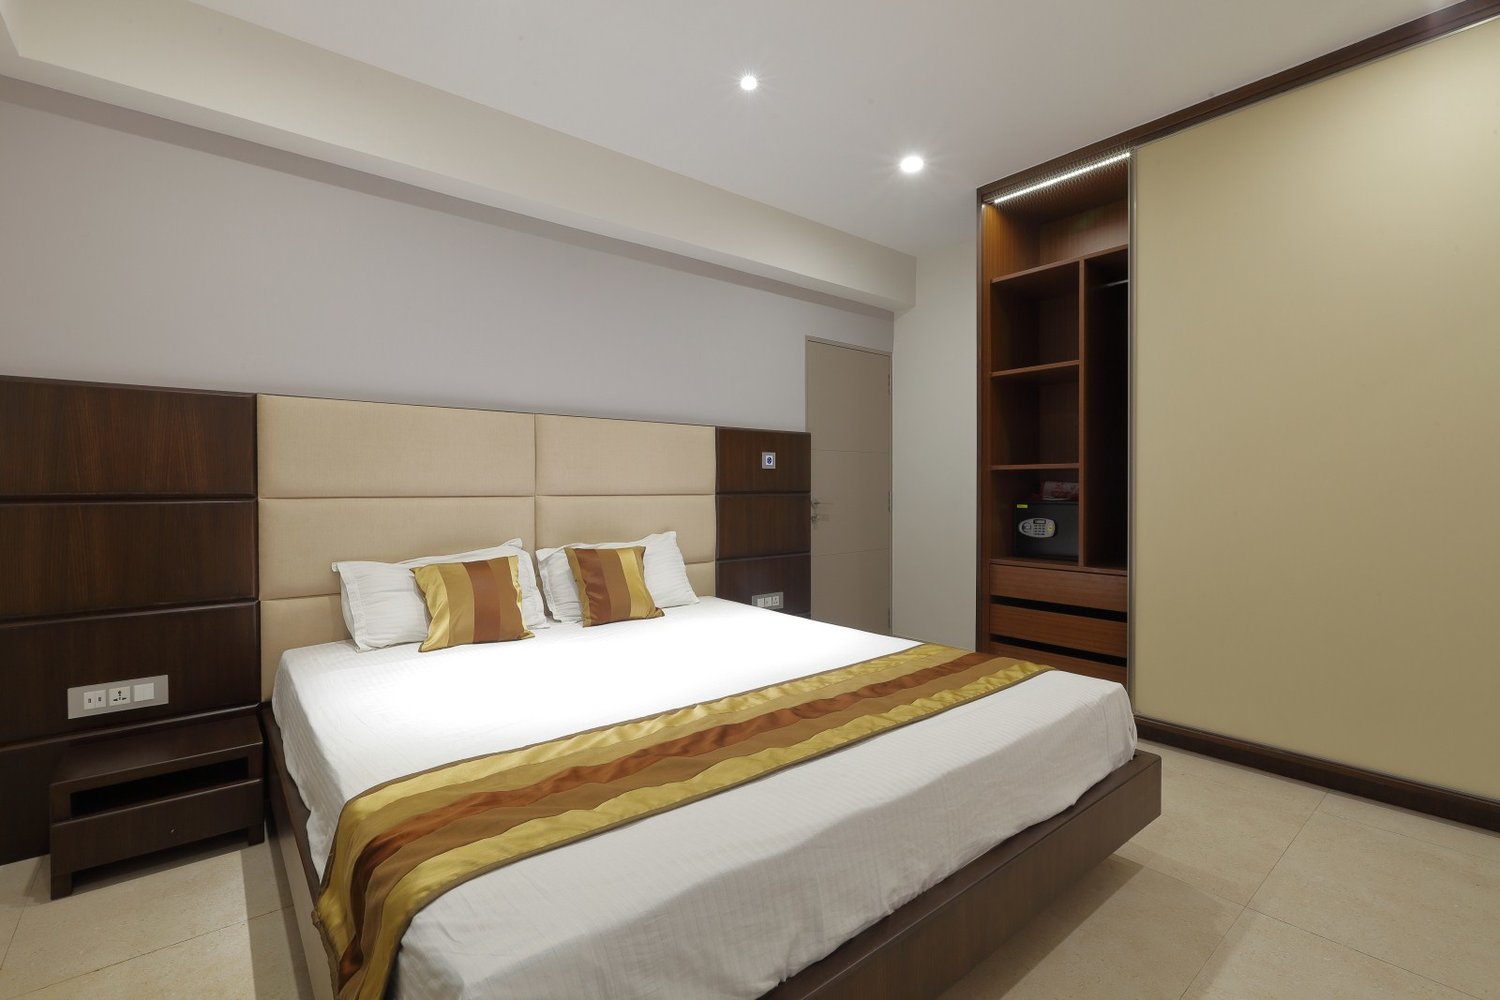 Interior Design Cost For Bedroom Best Architects